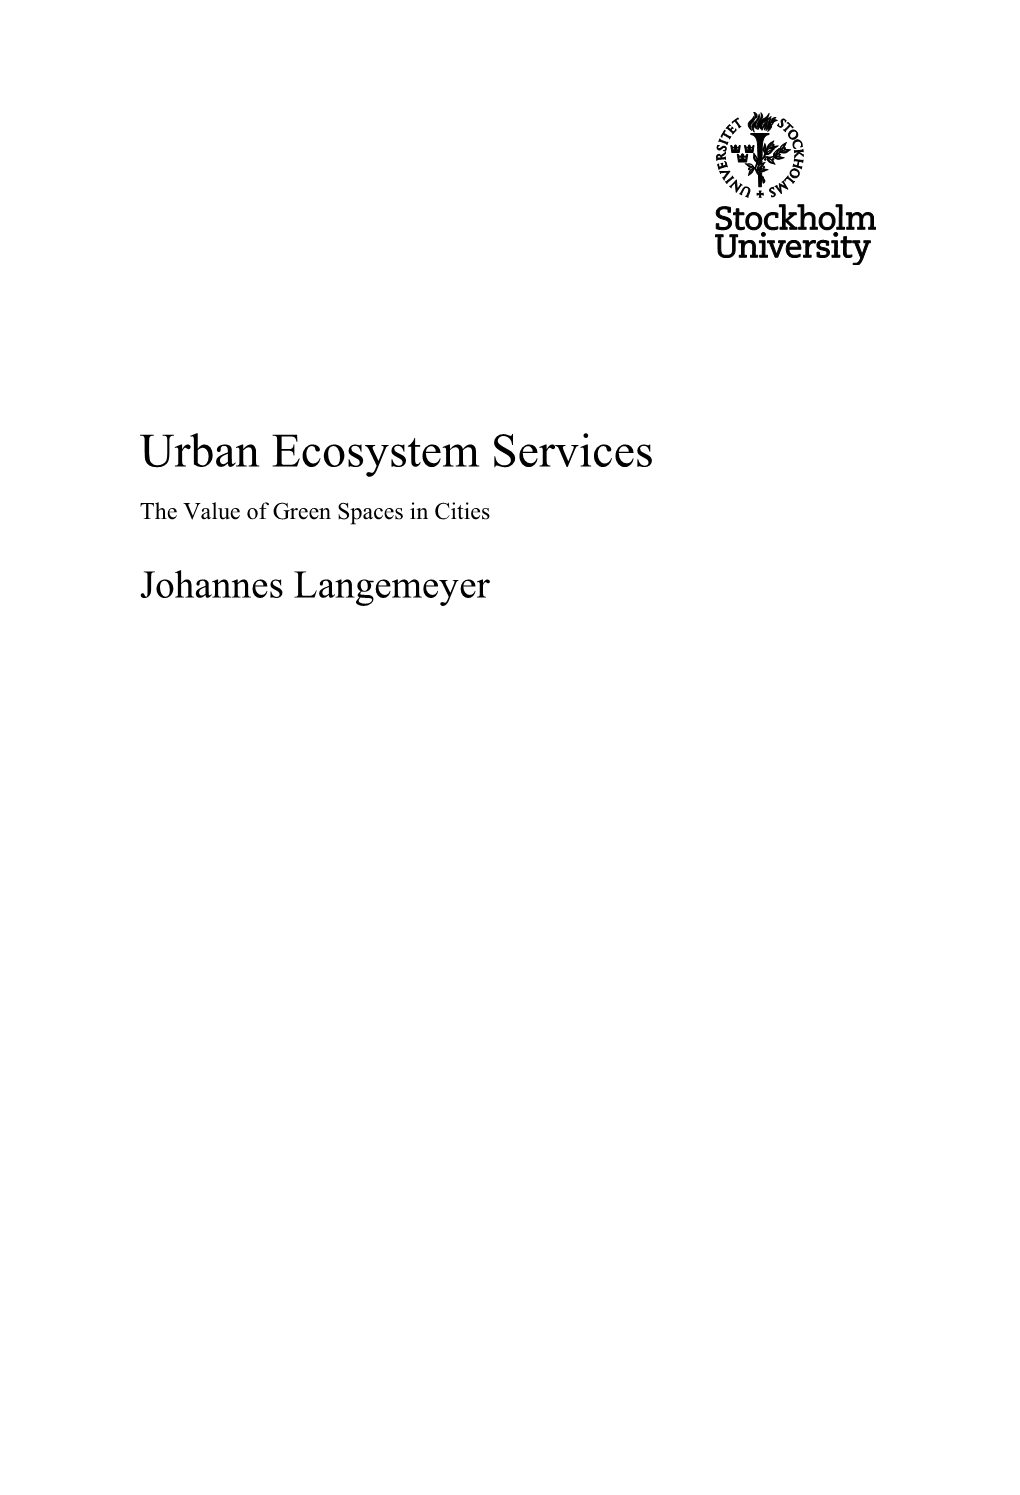 Urban Ecosystem Services the Value of Green Spaces in Cities